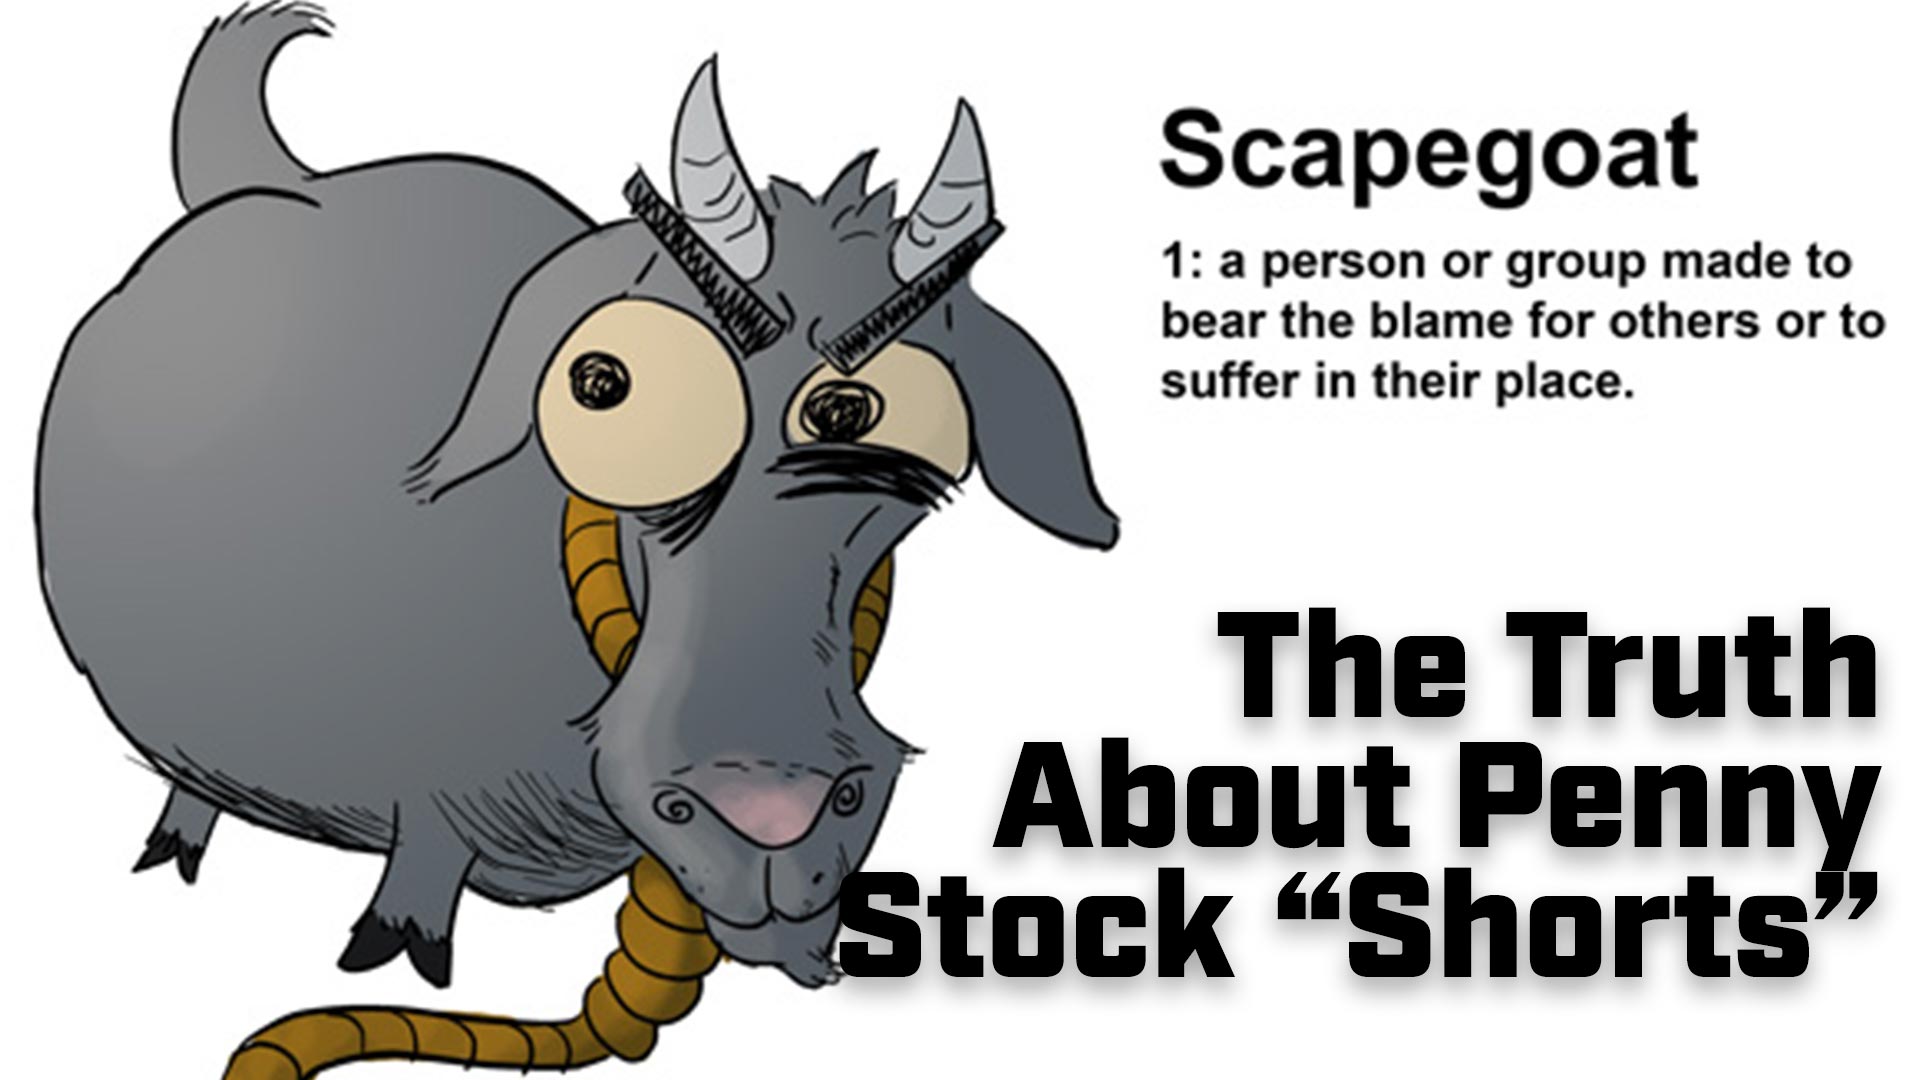 The Truth About Penny Stock "Shorts"